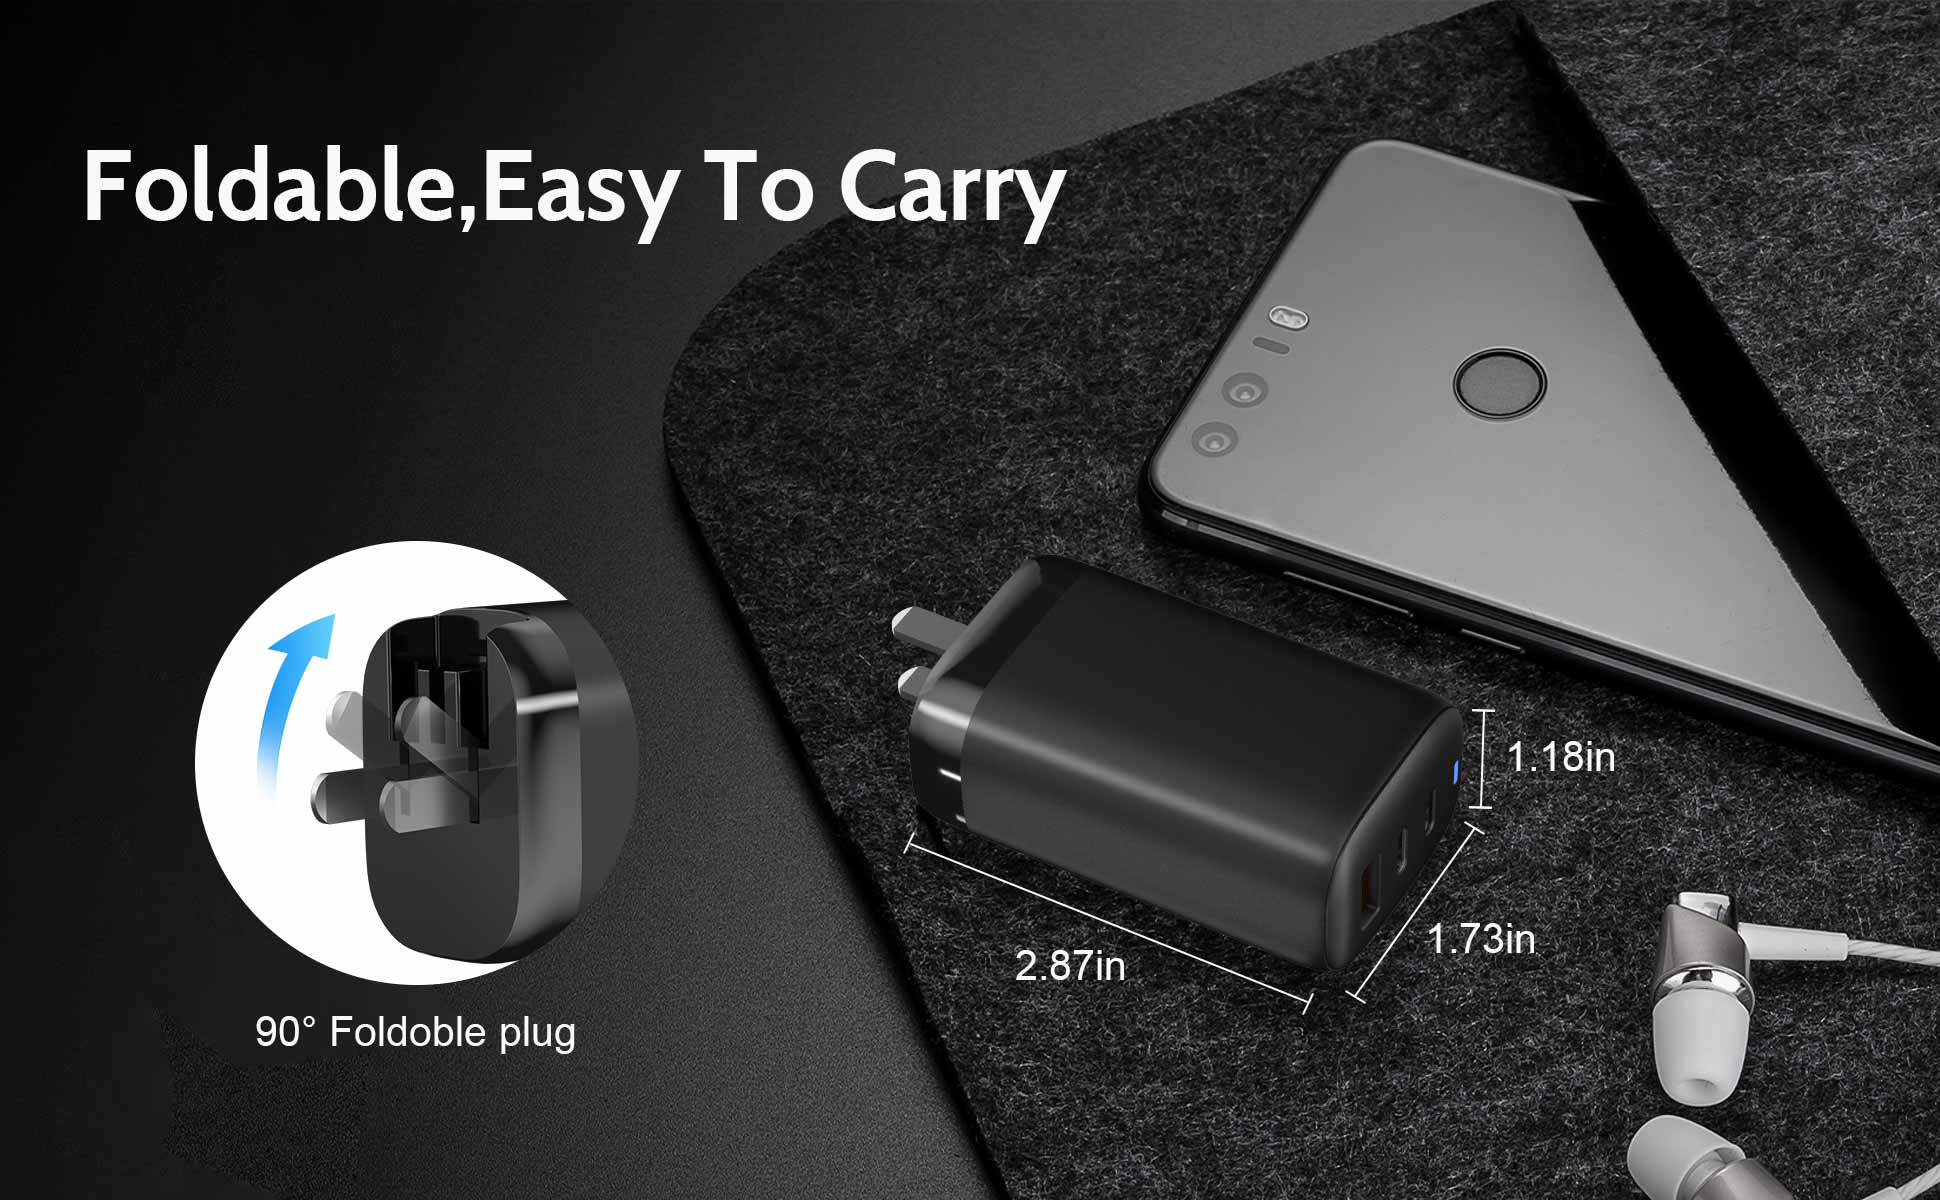 Foldable-65W-GaNcharger-easy-to-carry-Compact-Design-